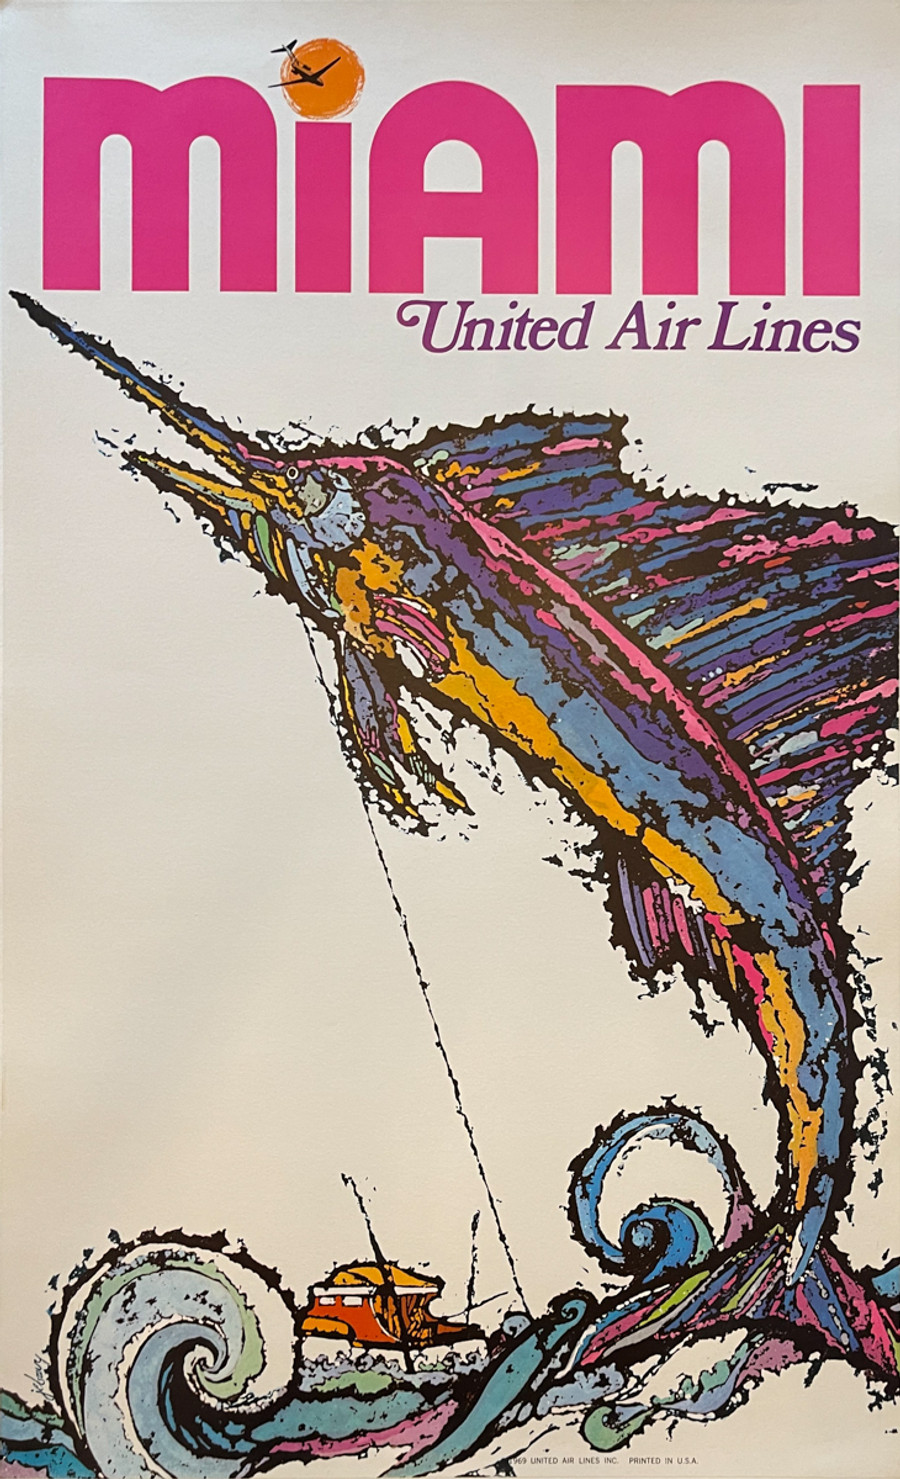 Miami Florida United Airlines Advertising Offset Lithograph original American travel poster by James Jebavy from 1967 linen backed.